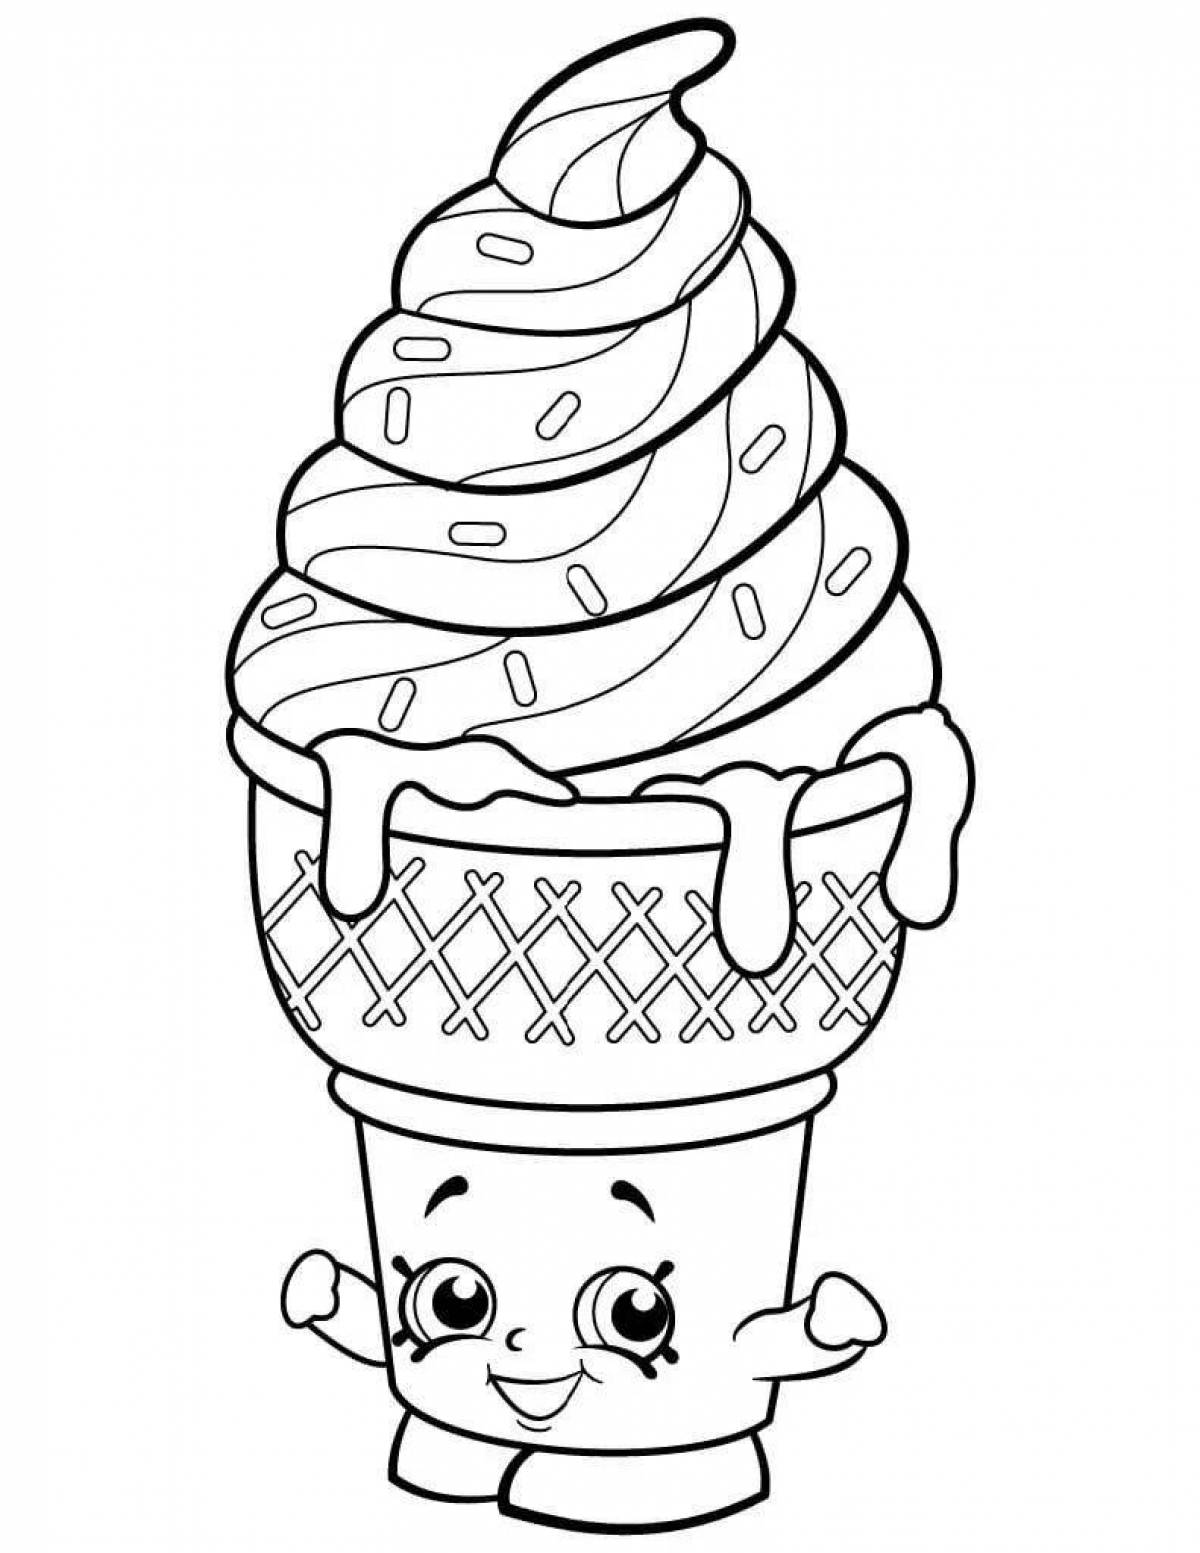 Coloring book sparkling ice cream for kids